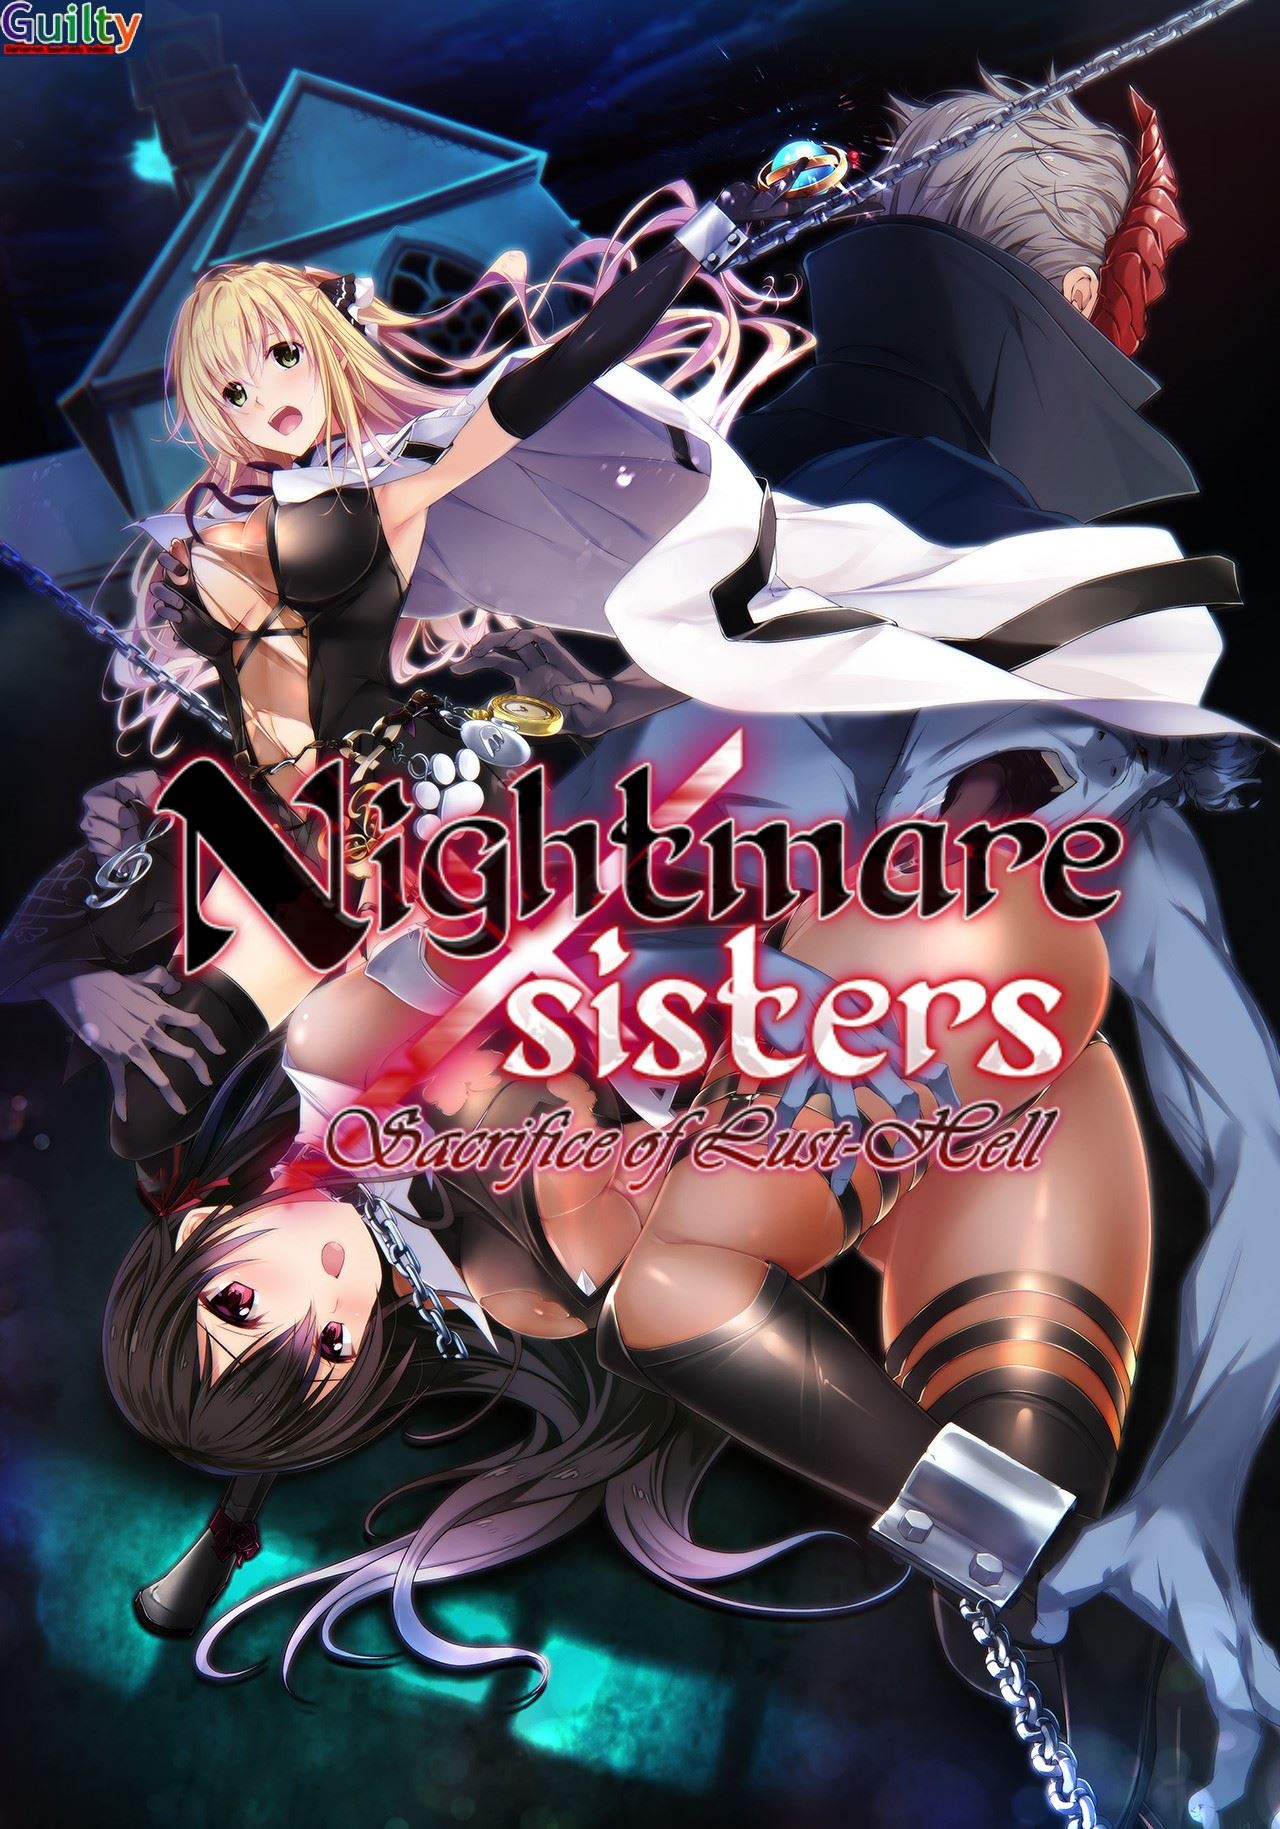 Nightmare x Sisters – Sacrifice of Lust-Hell [Finished] - Version: Final